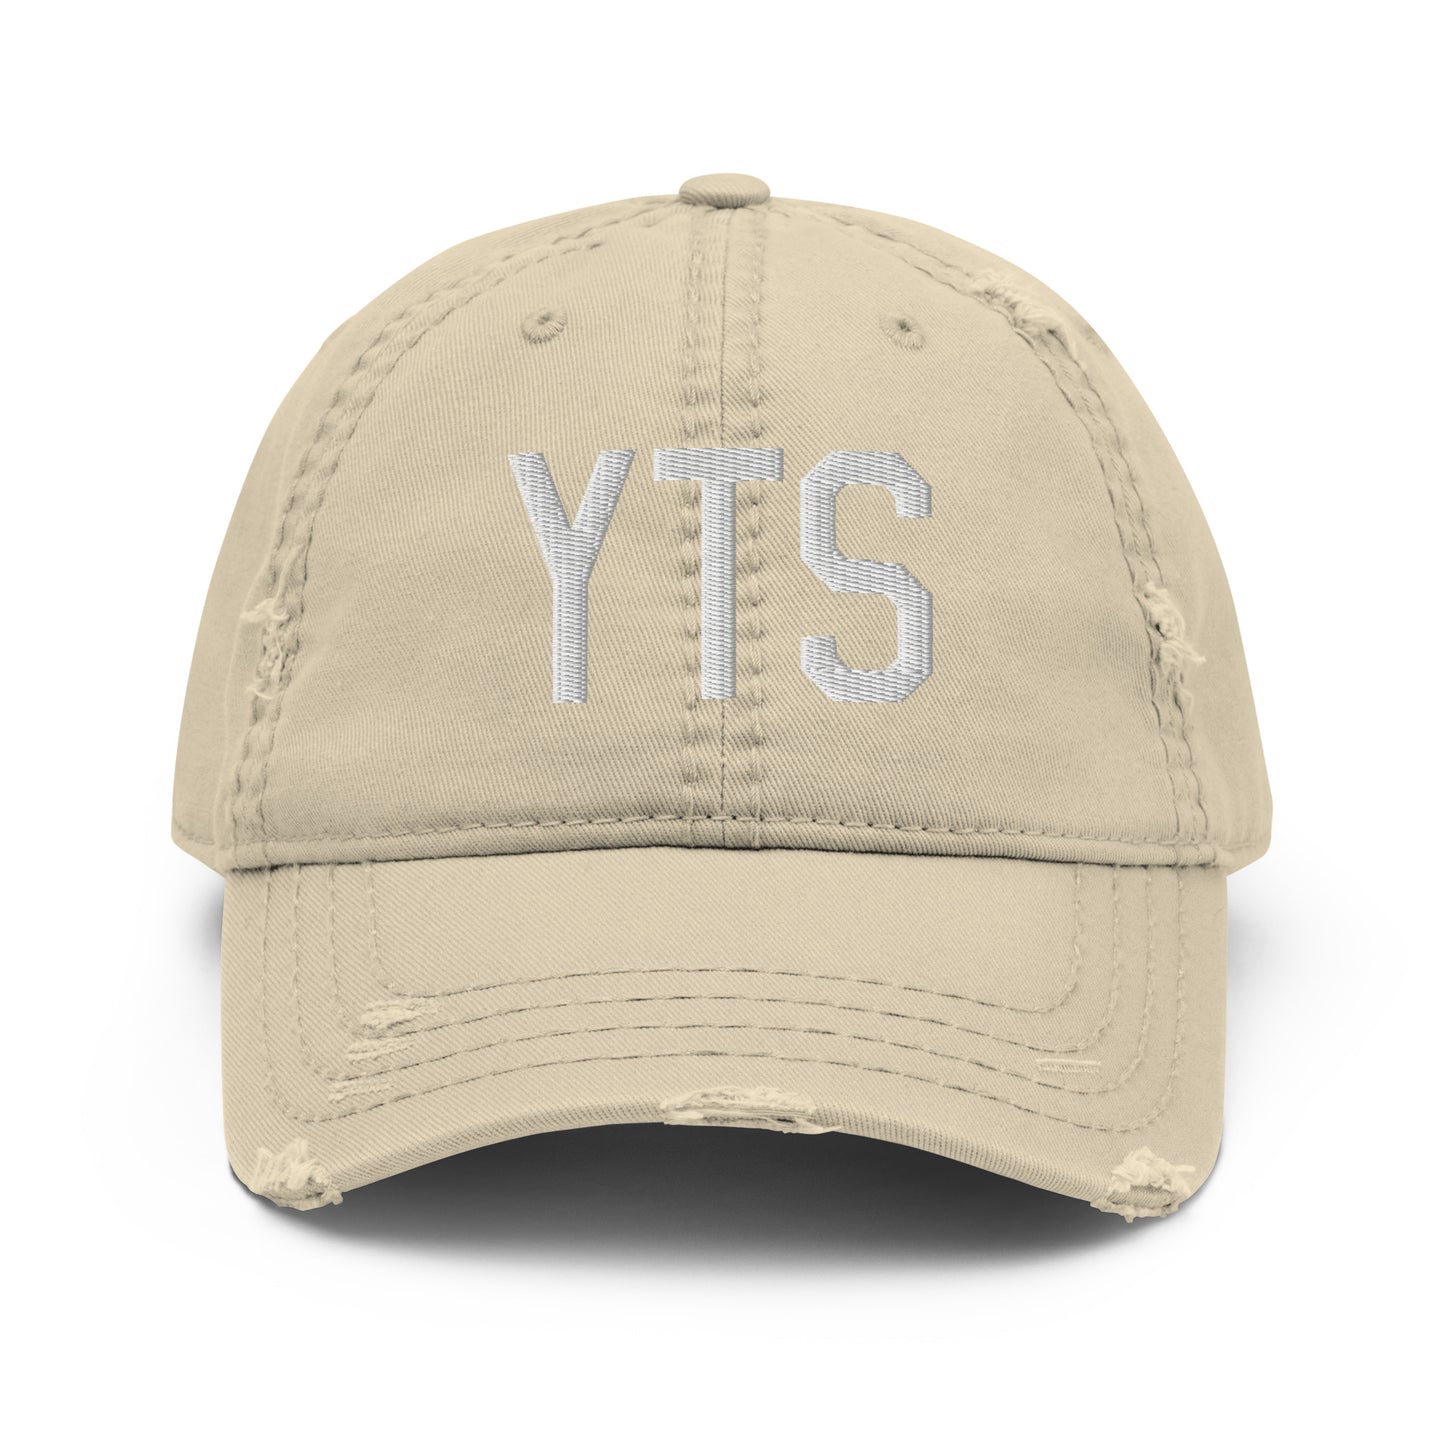 Airport Code Distressed Hat - White • YTS Timmins • YHM Designs - Image 18